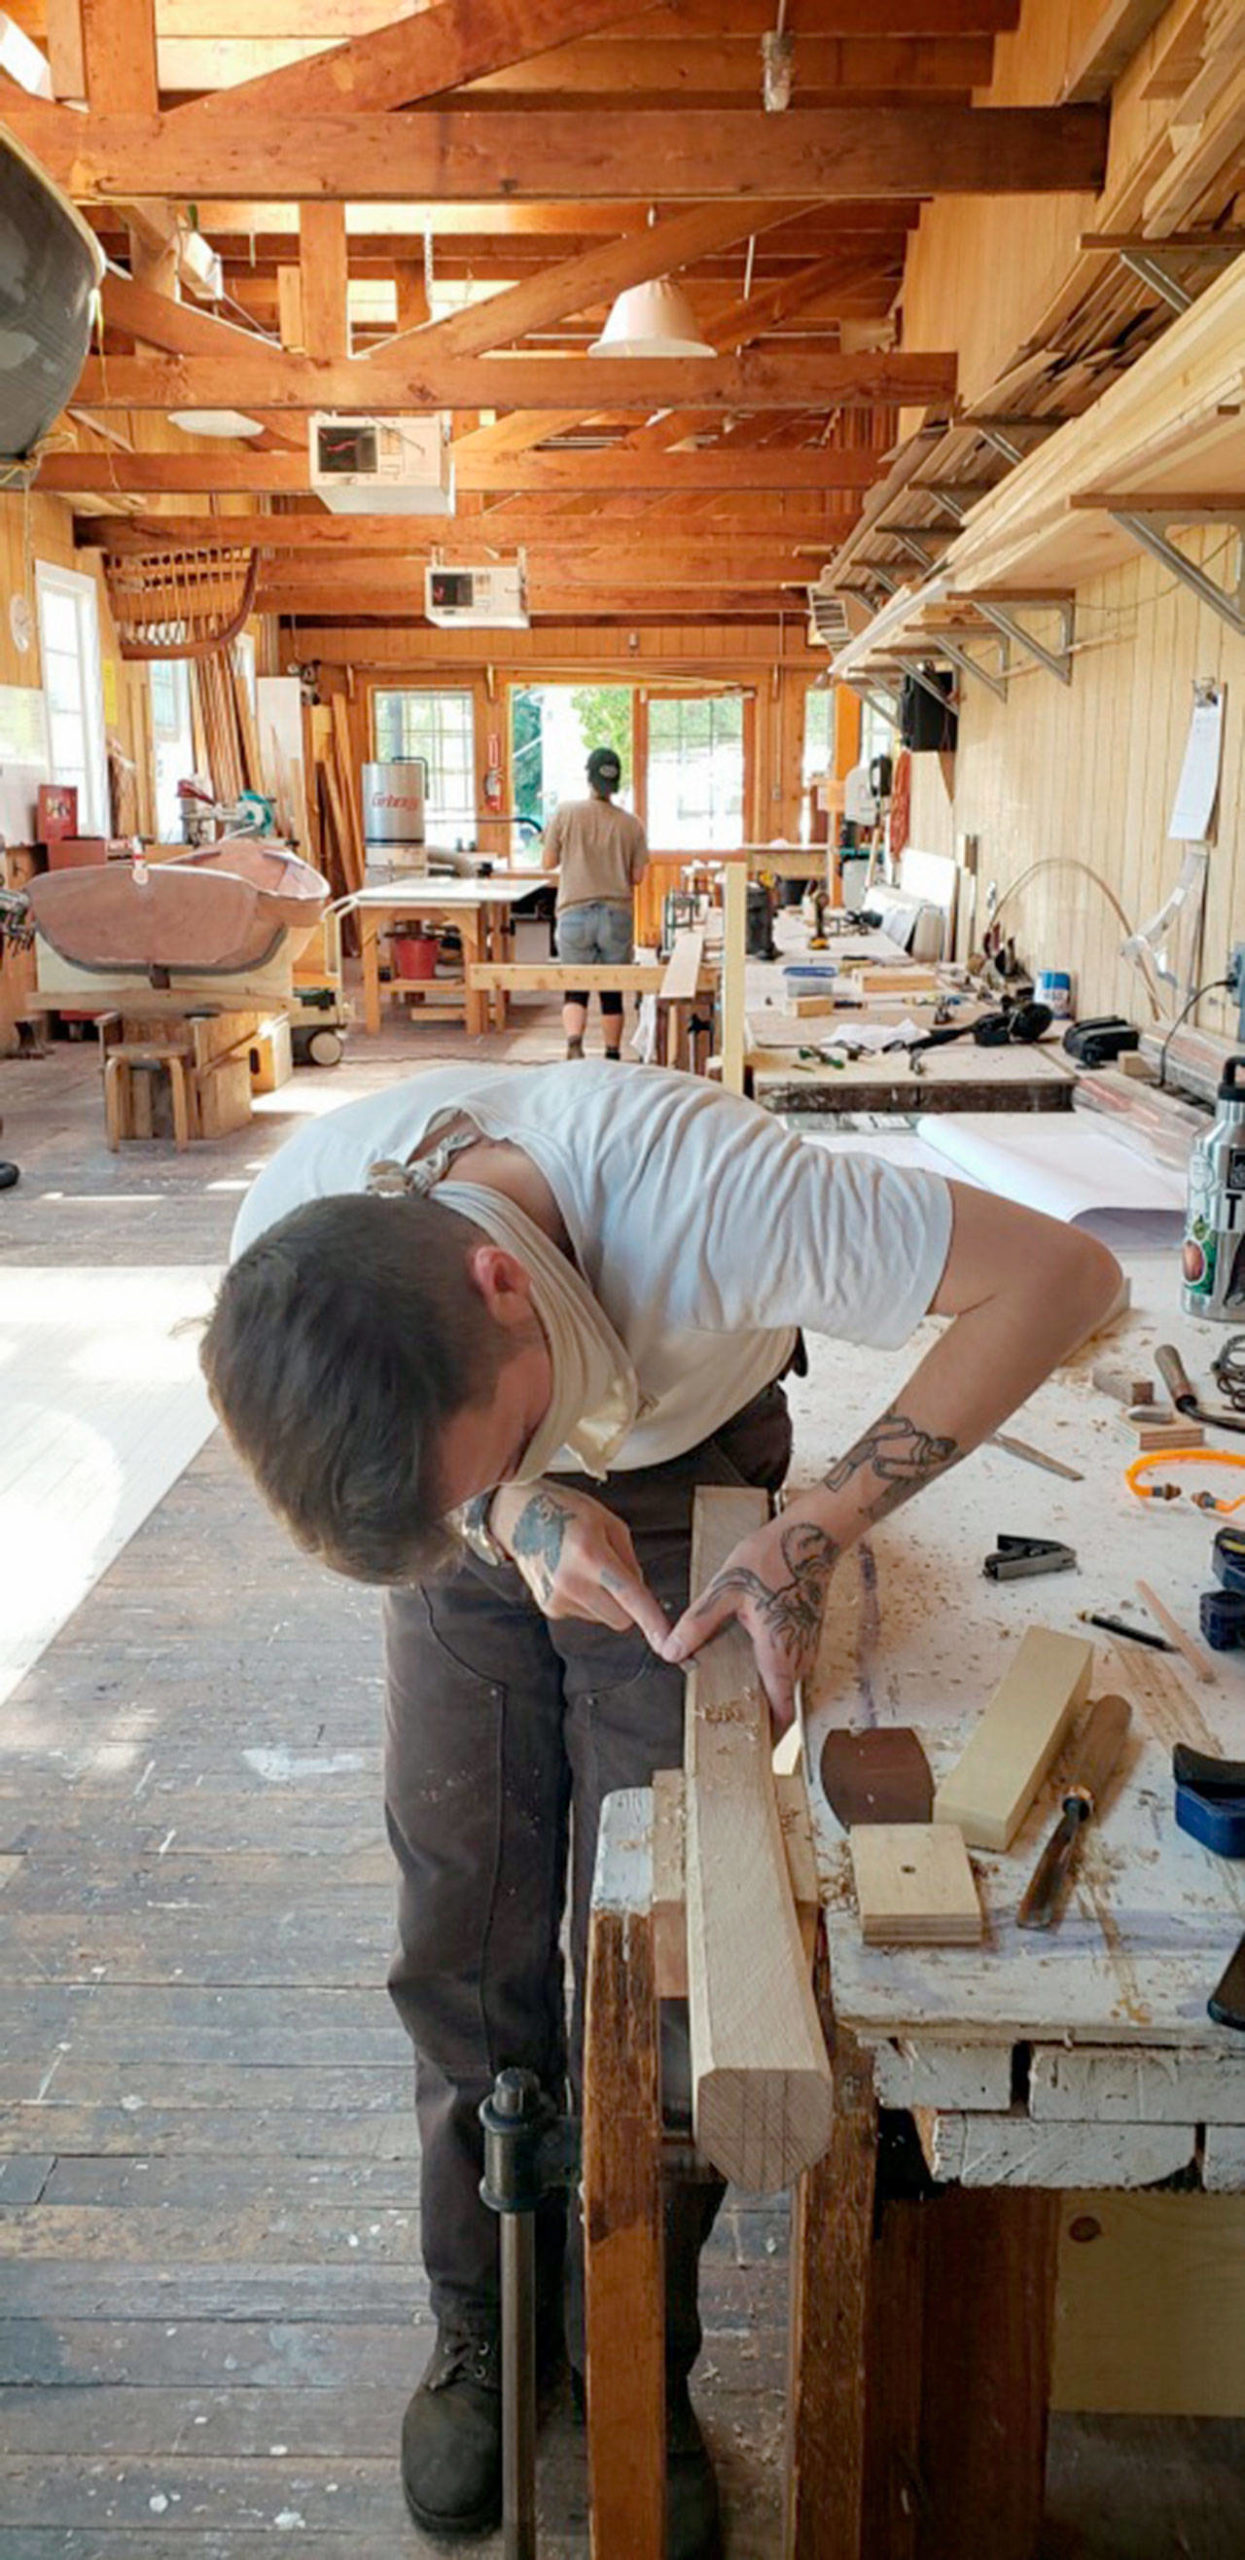 Jack Sincevich is a carpenter by trade and hopes to hone his skills while working with artist Jay Smith of Anacortes as part of a Washington State apprenticeship program.